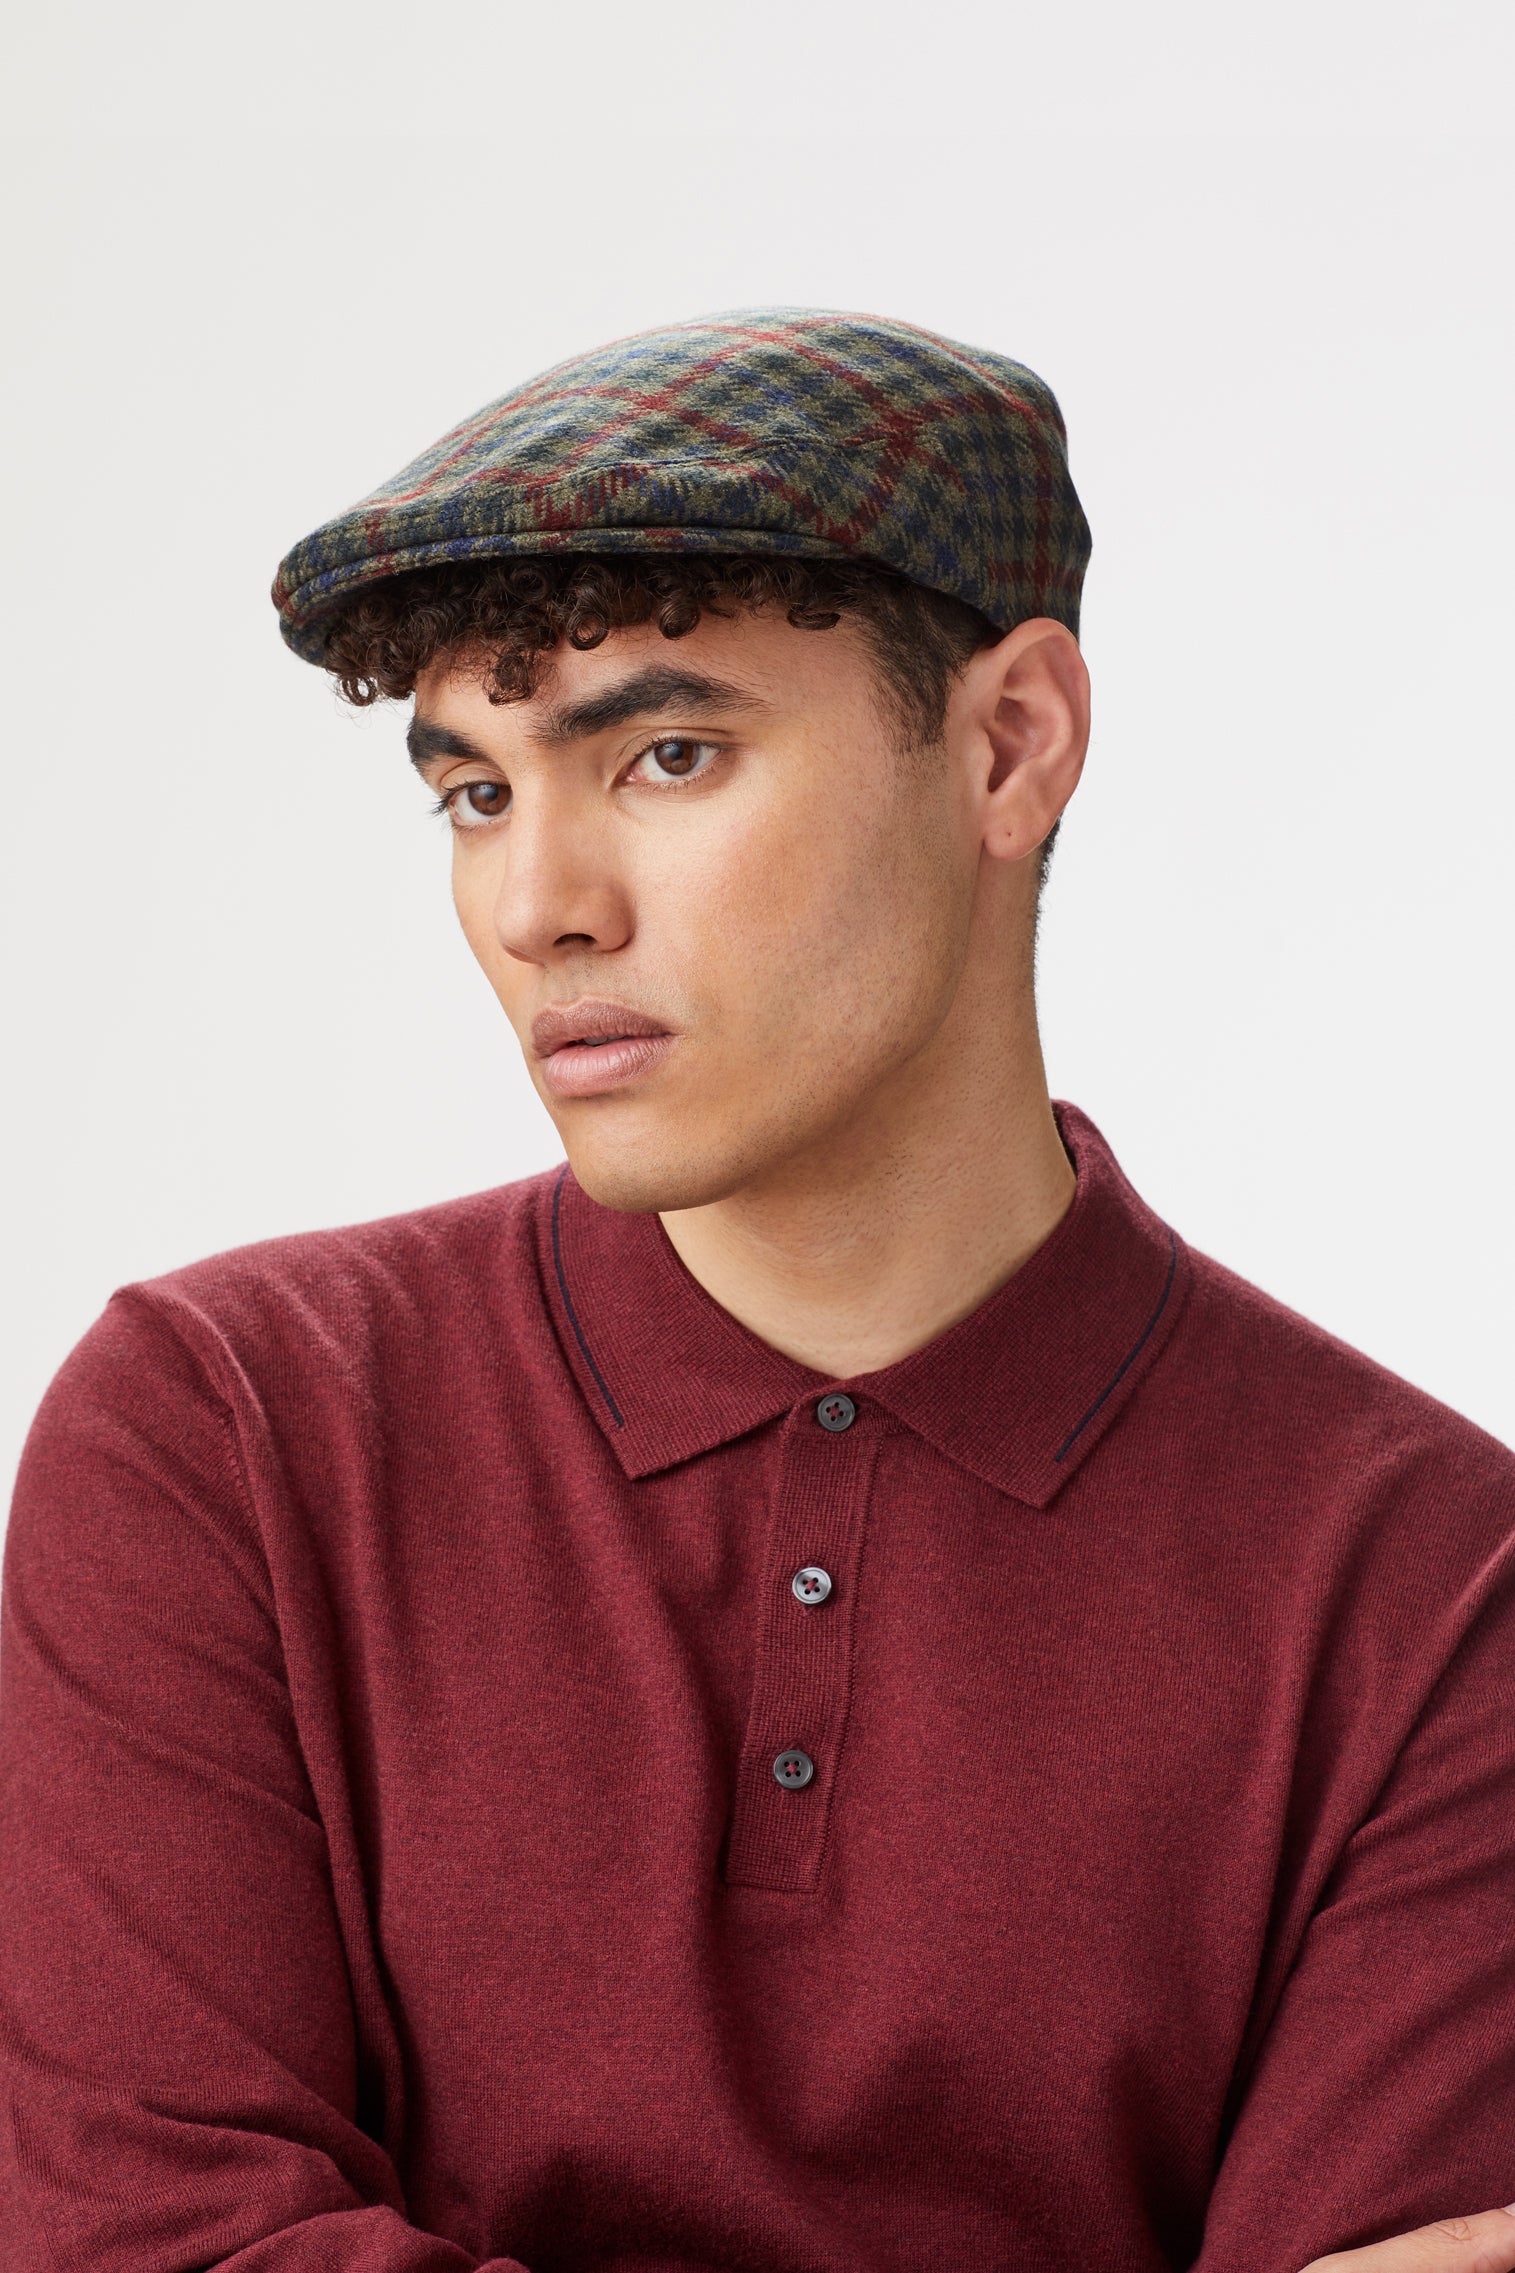 Gill Cashmere Flat Cap - Lock & Co. Christmas Gift Edit - Lock & Co. Hatters London UK